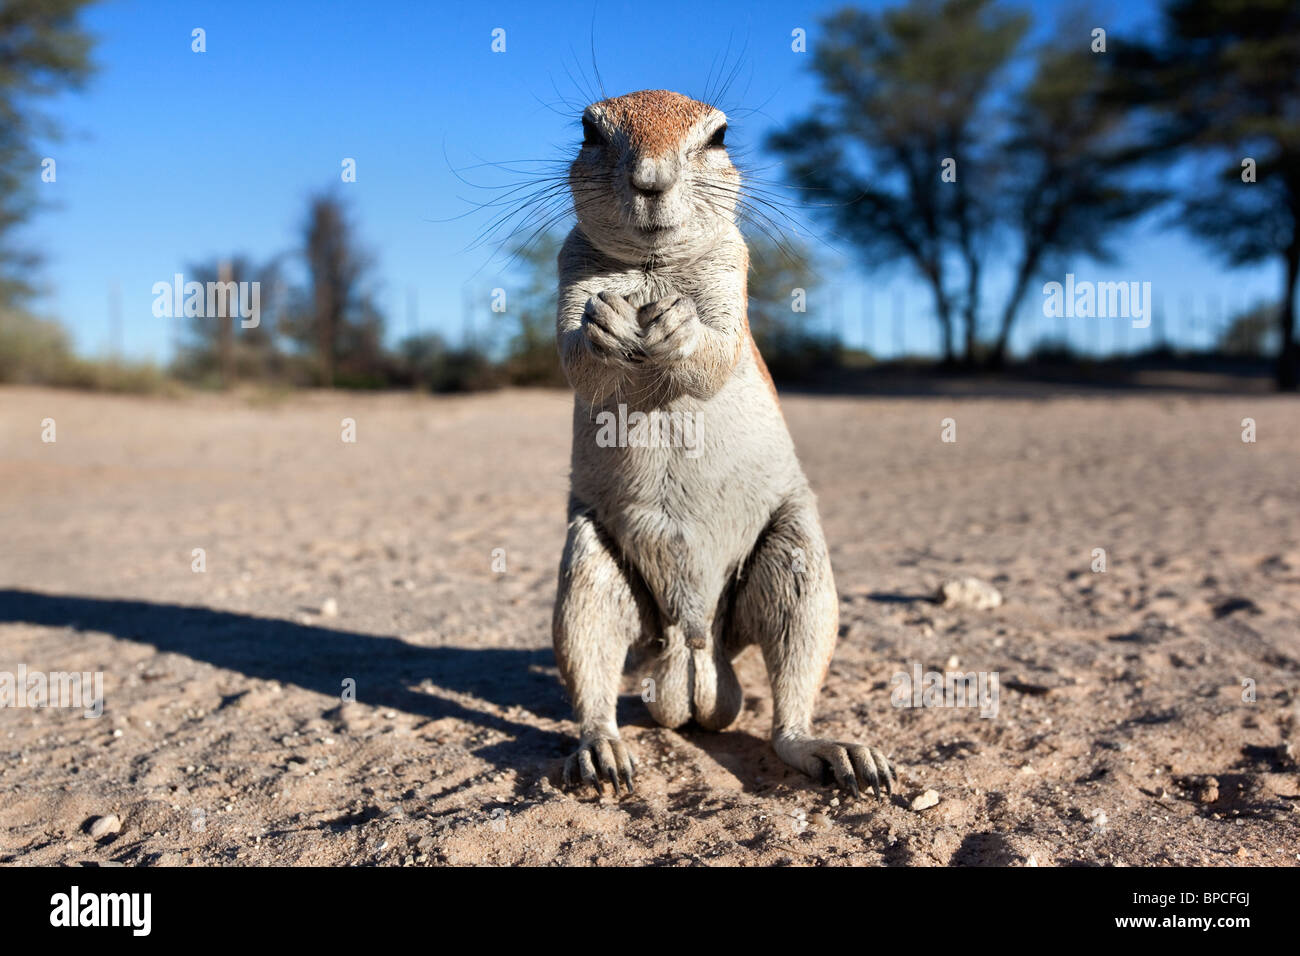 [Linked Image from c8.alamy.com]